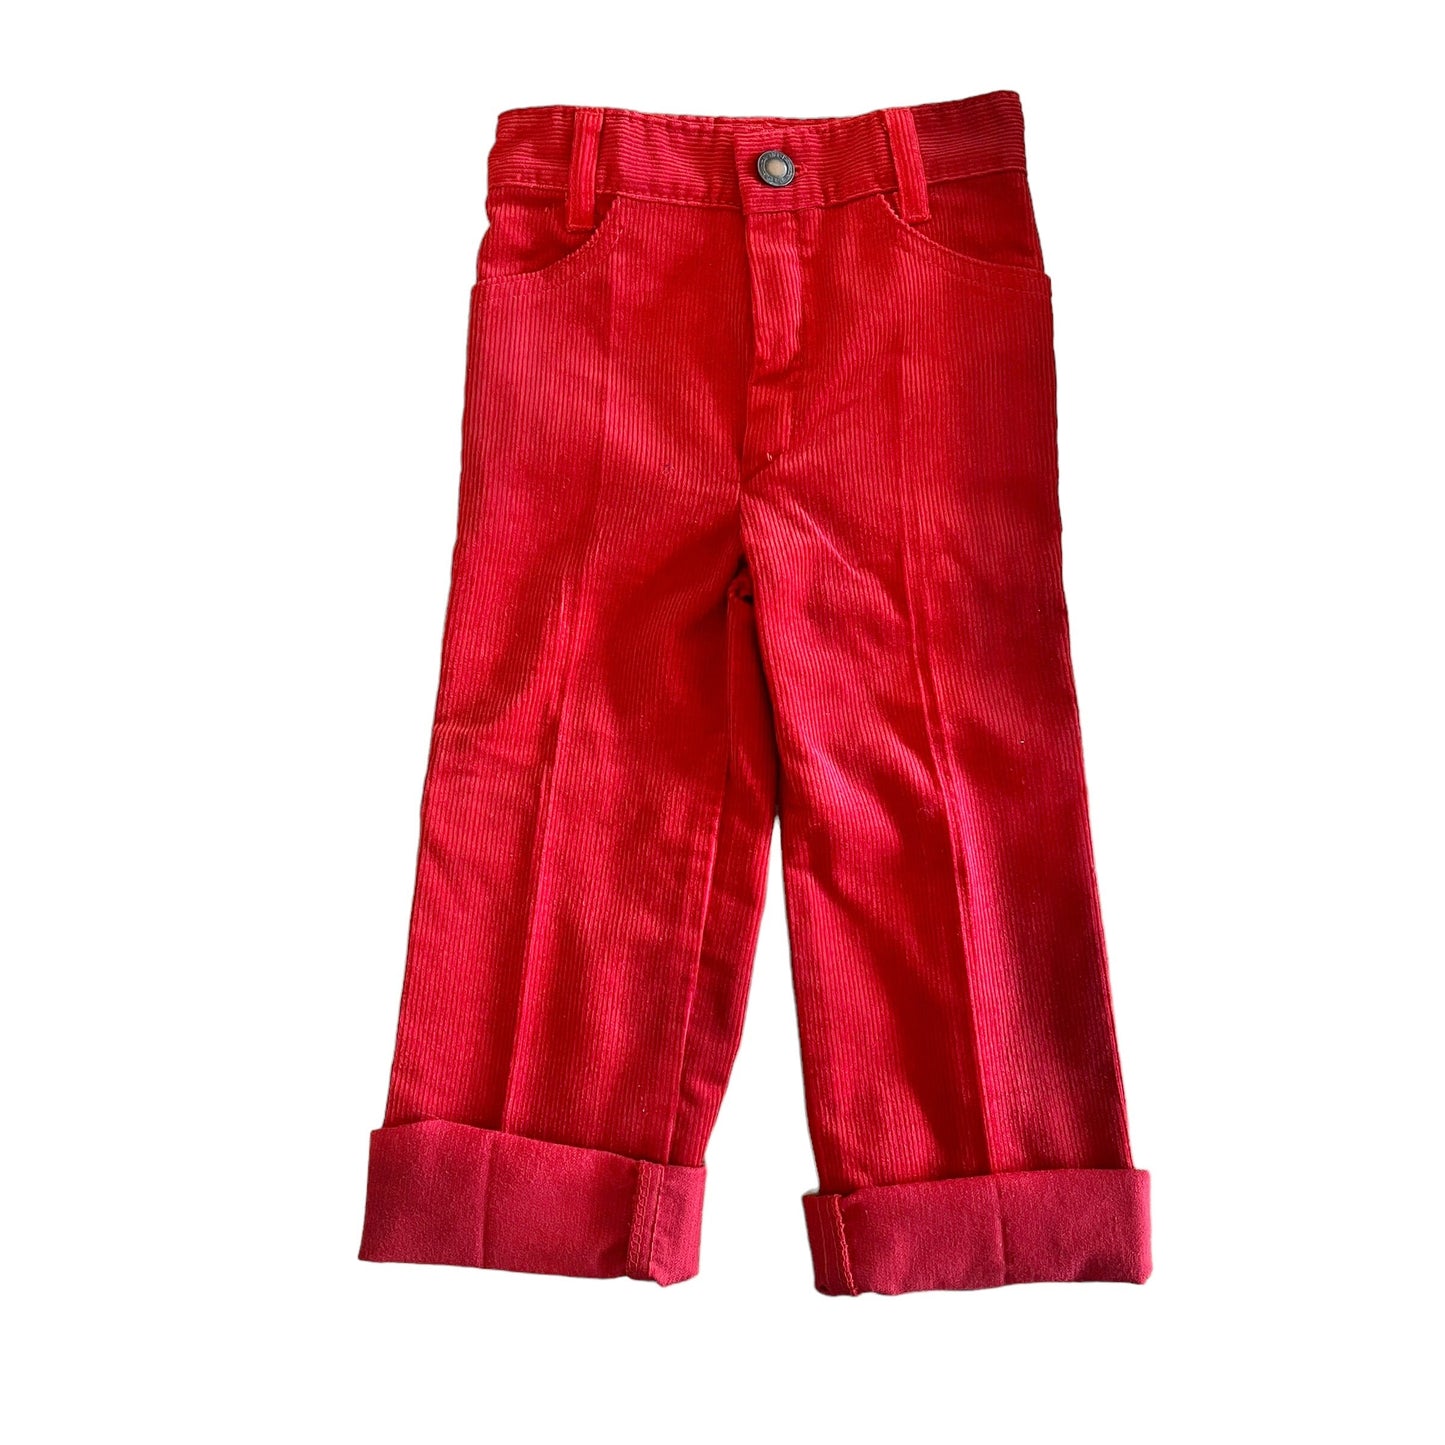 1970s Red Corduroy Trousers / 18-24M